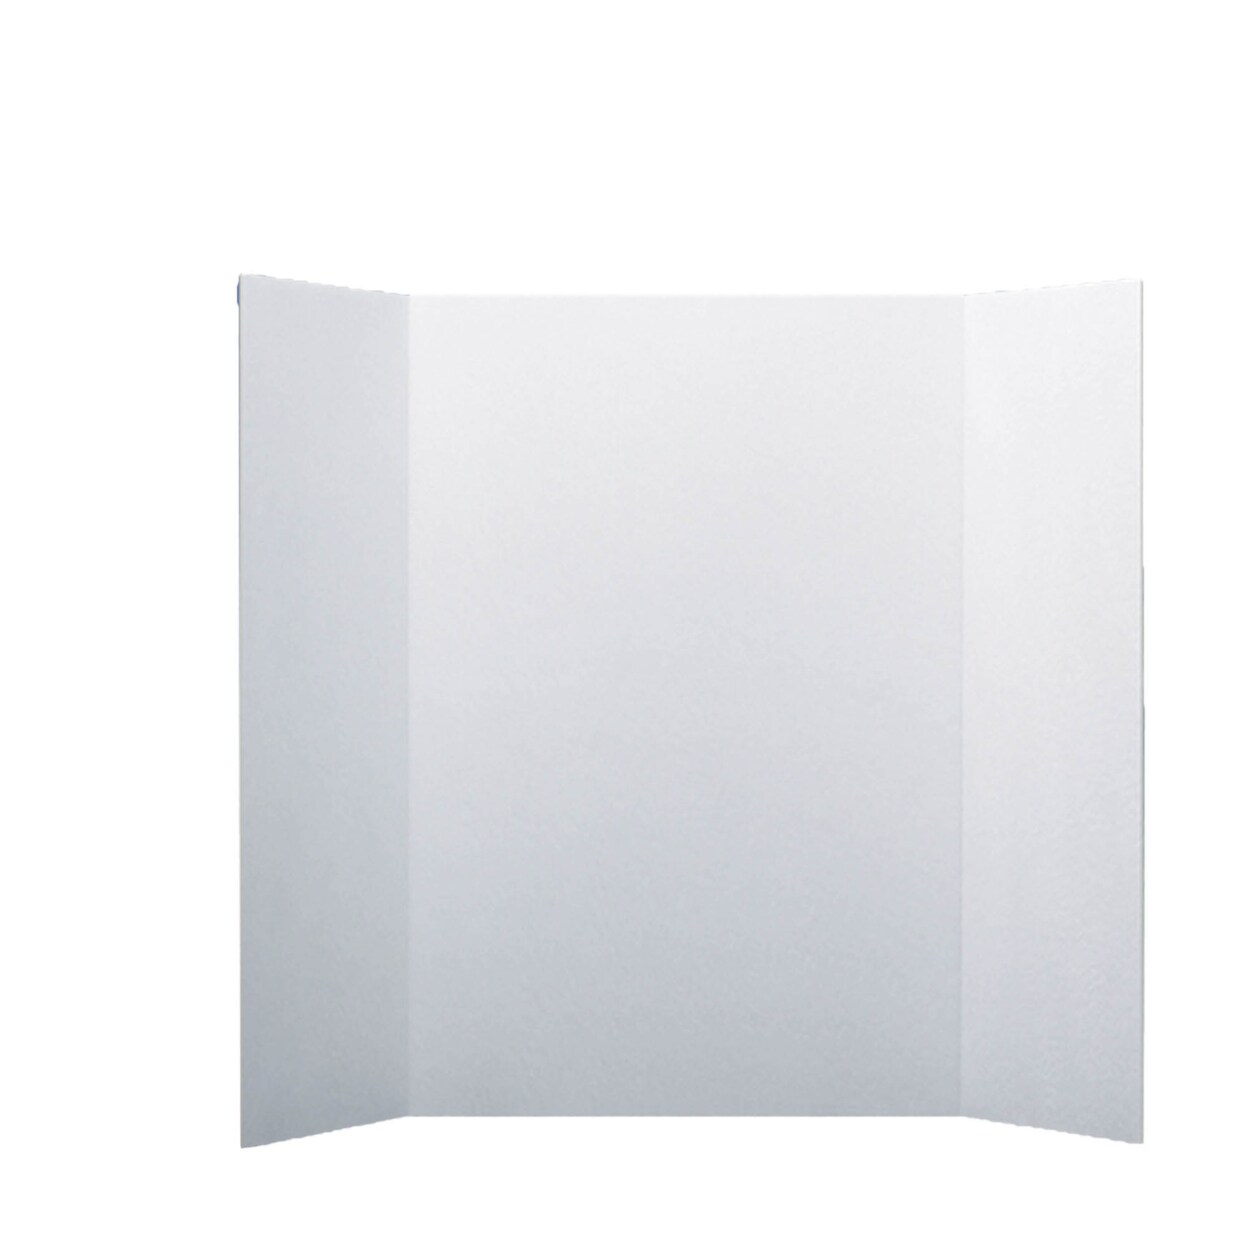 Flipside Products School, Home, College And Office 36 X 48 White Foam  Project Board Bulk Pack Of 10